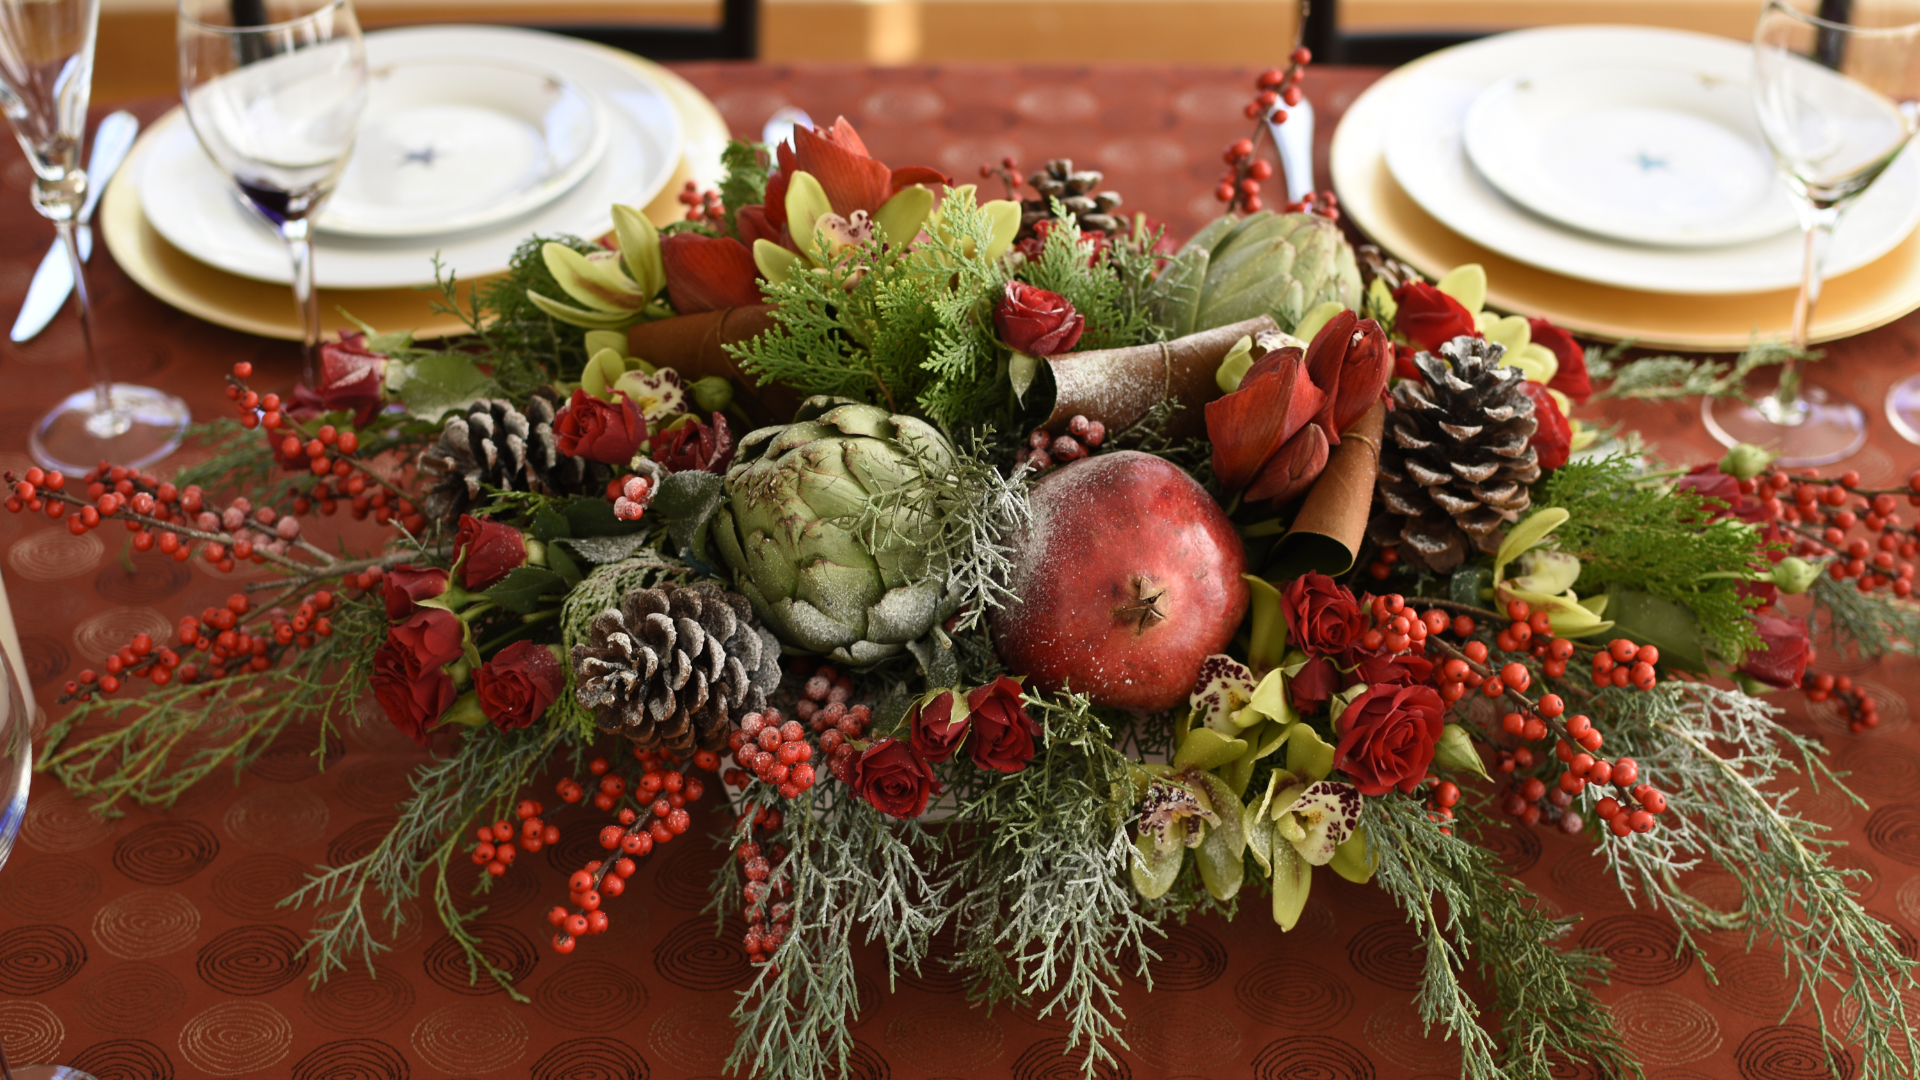 Joyful Gathering: Christmas Centerpieces to Wow Your Guests